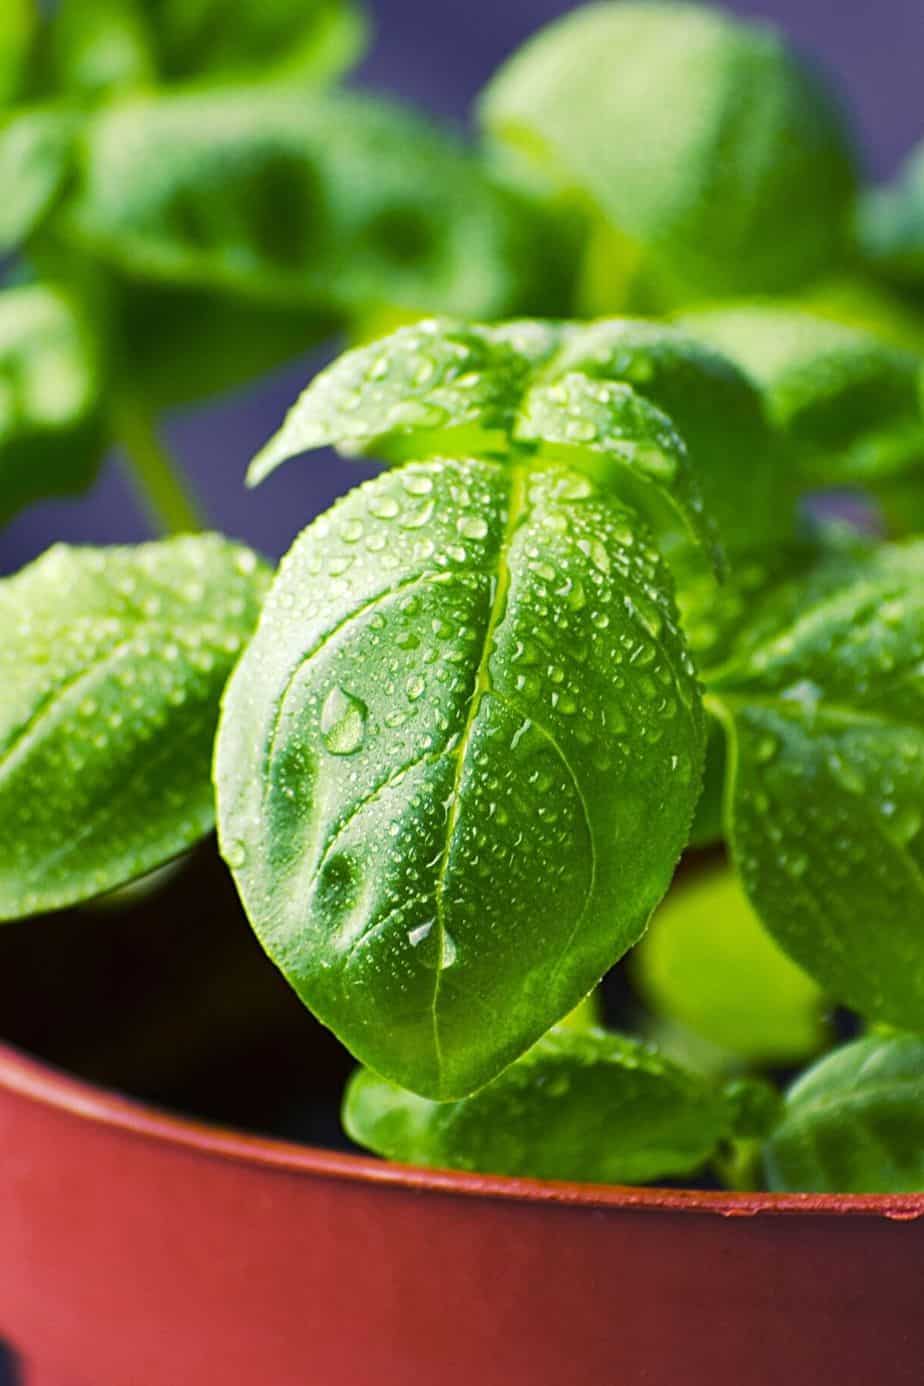 Basil is a popular herb that you can easily grow on your south-facing balcony